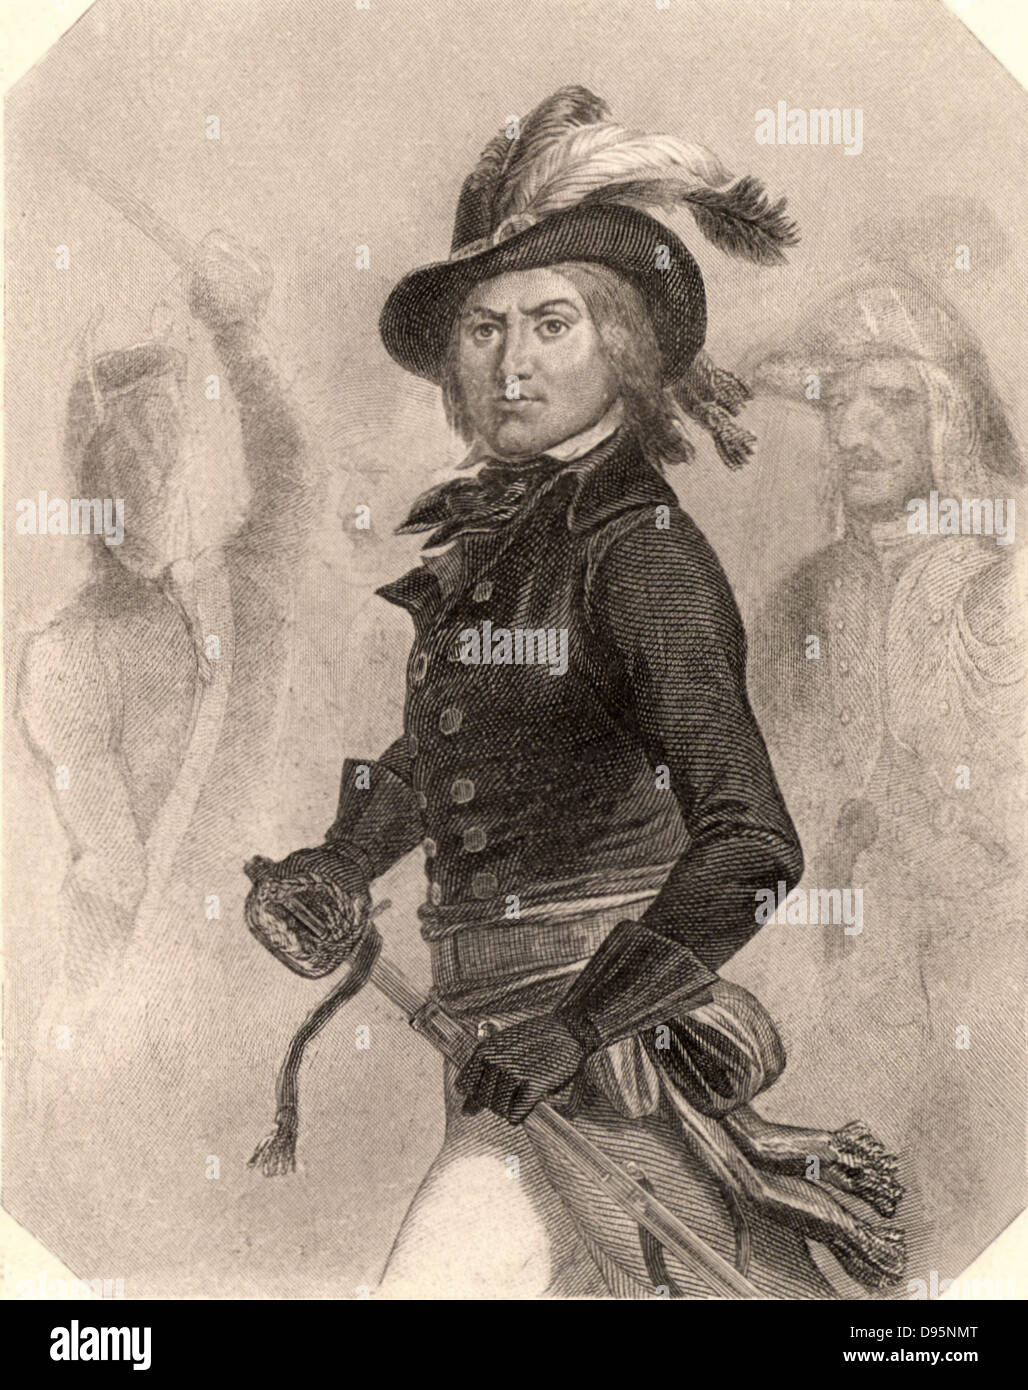 Paul Jean Francois Nicolas, Comte de Barras (1755-1829) French revolutionary. Especially cruel and ruthless. One of the five members of the Directoire (1795). Exiled after Napoleon's coup of 18 Brumaire (9 November 1799). Engraving. Stock Photo